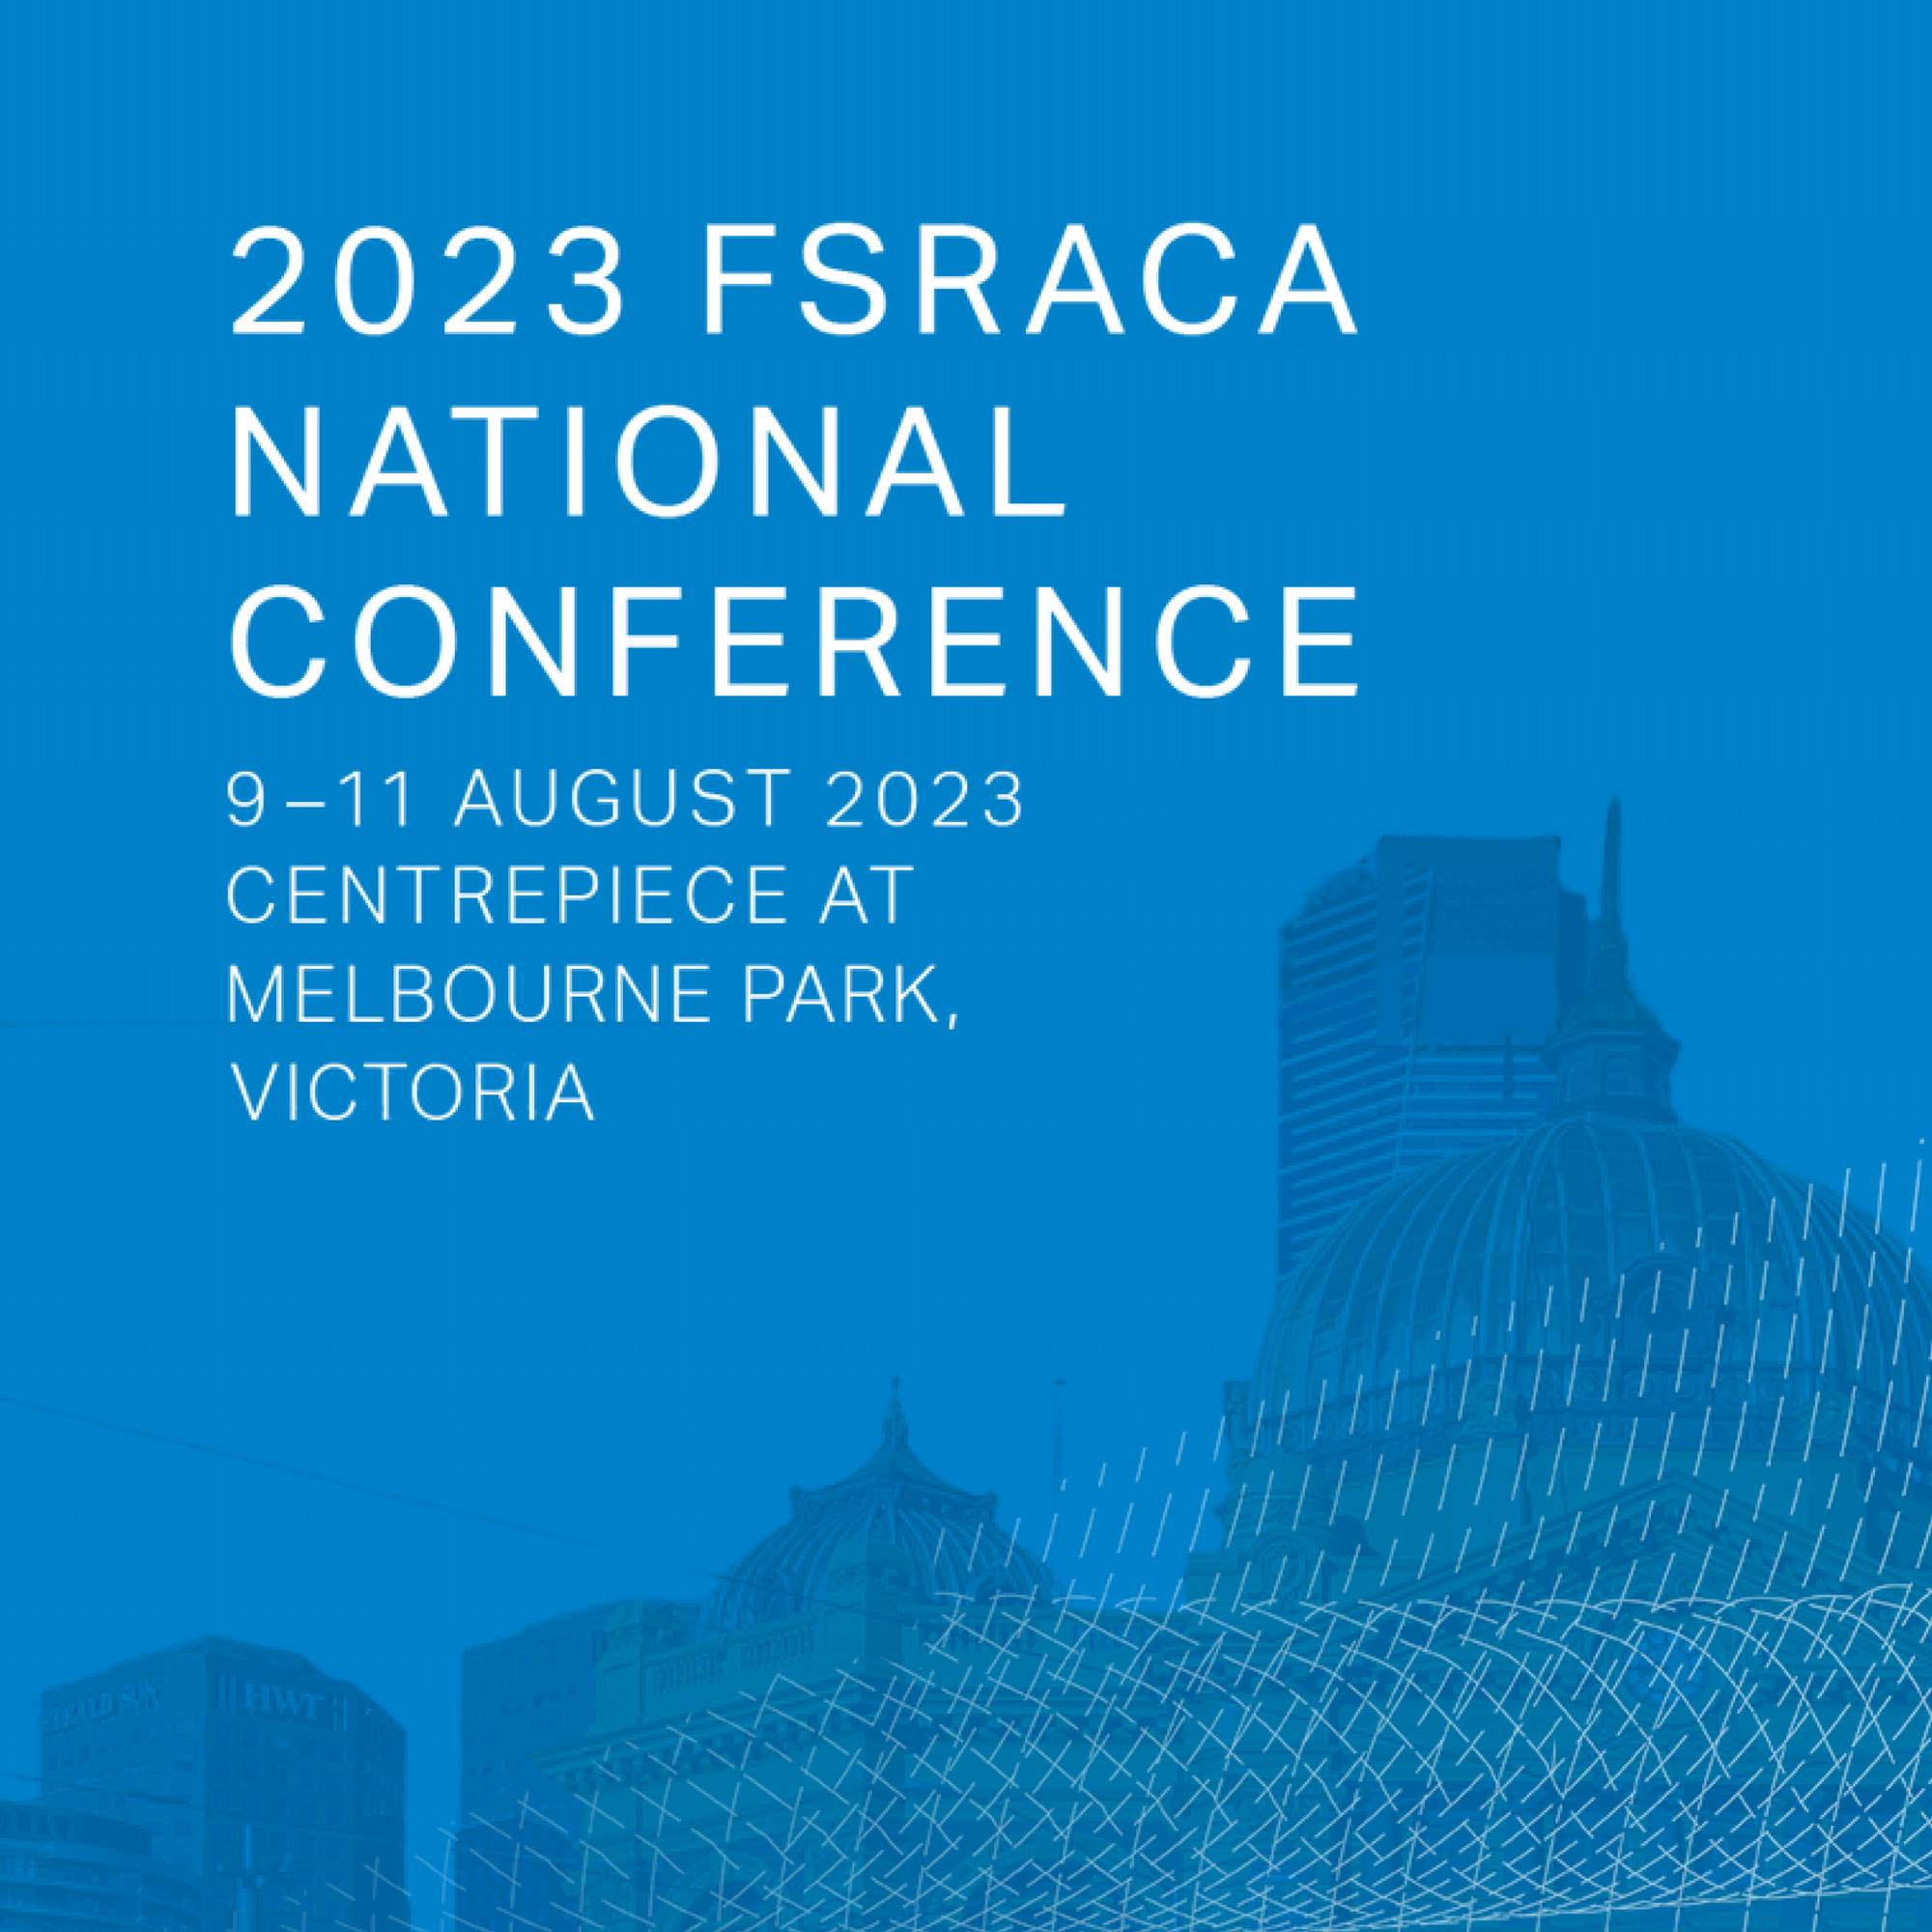 FSRACA National Conference 2023